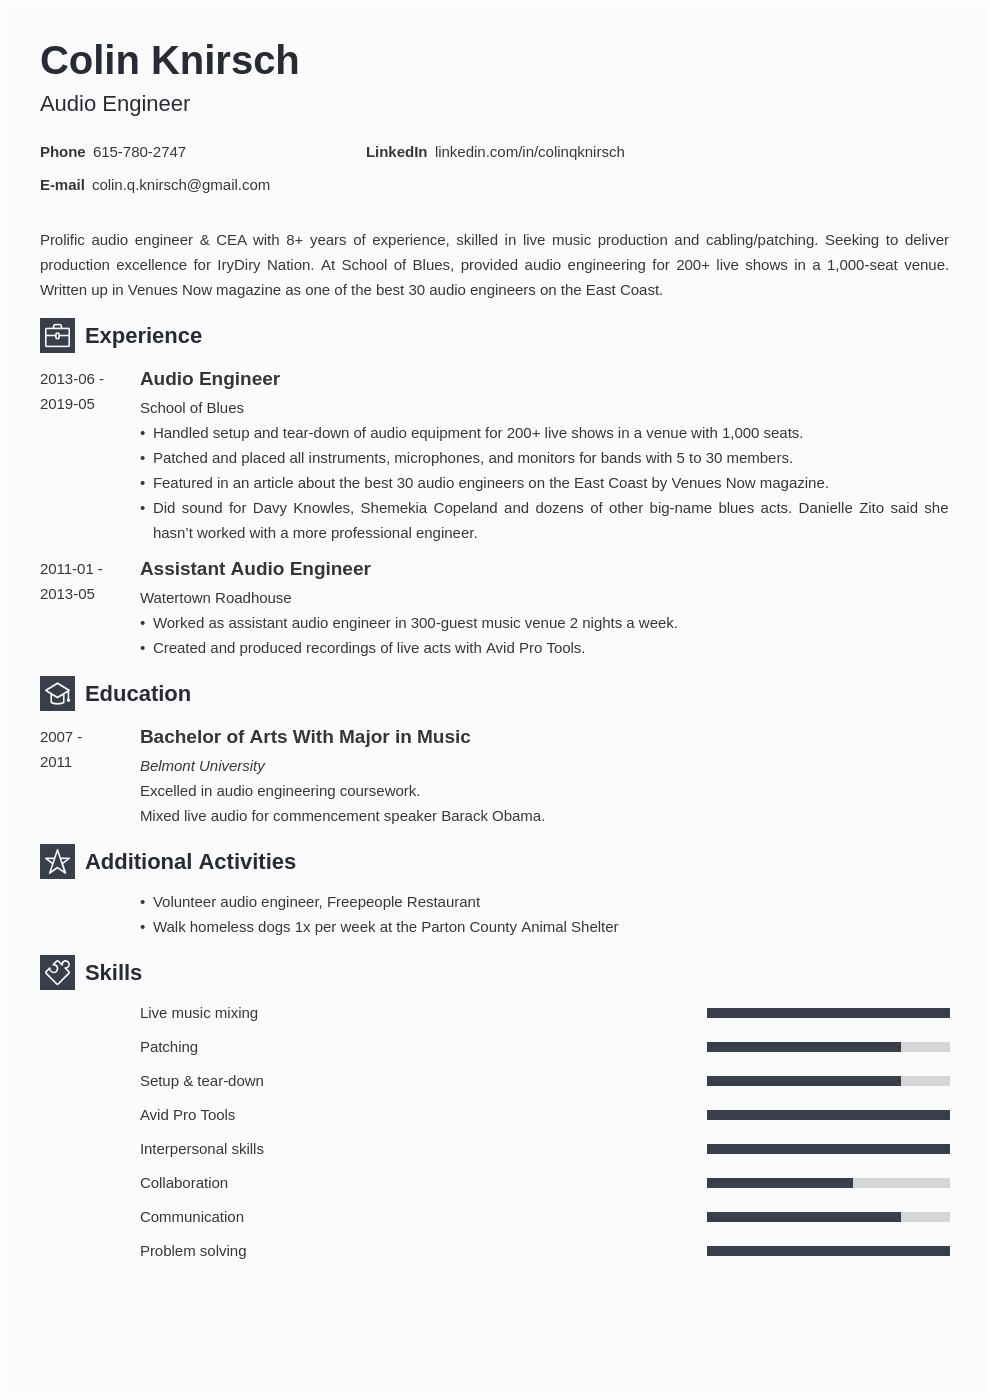 Resume Cover Letter Samples for sound Recording Engineer Audio Engineer Resume Sample [also Live sound Production]